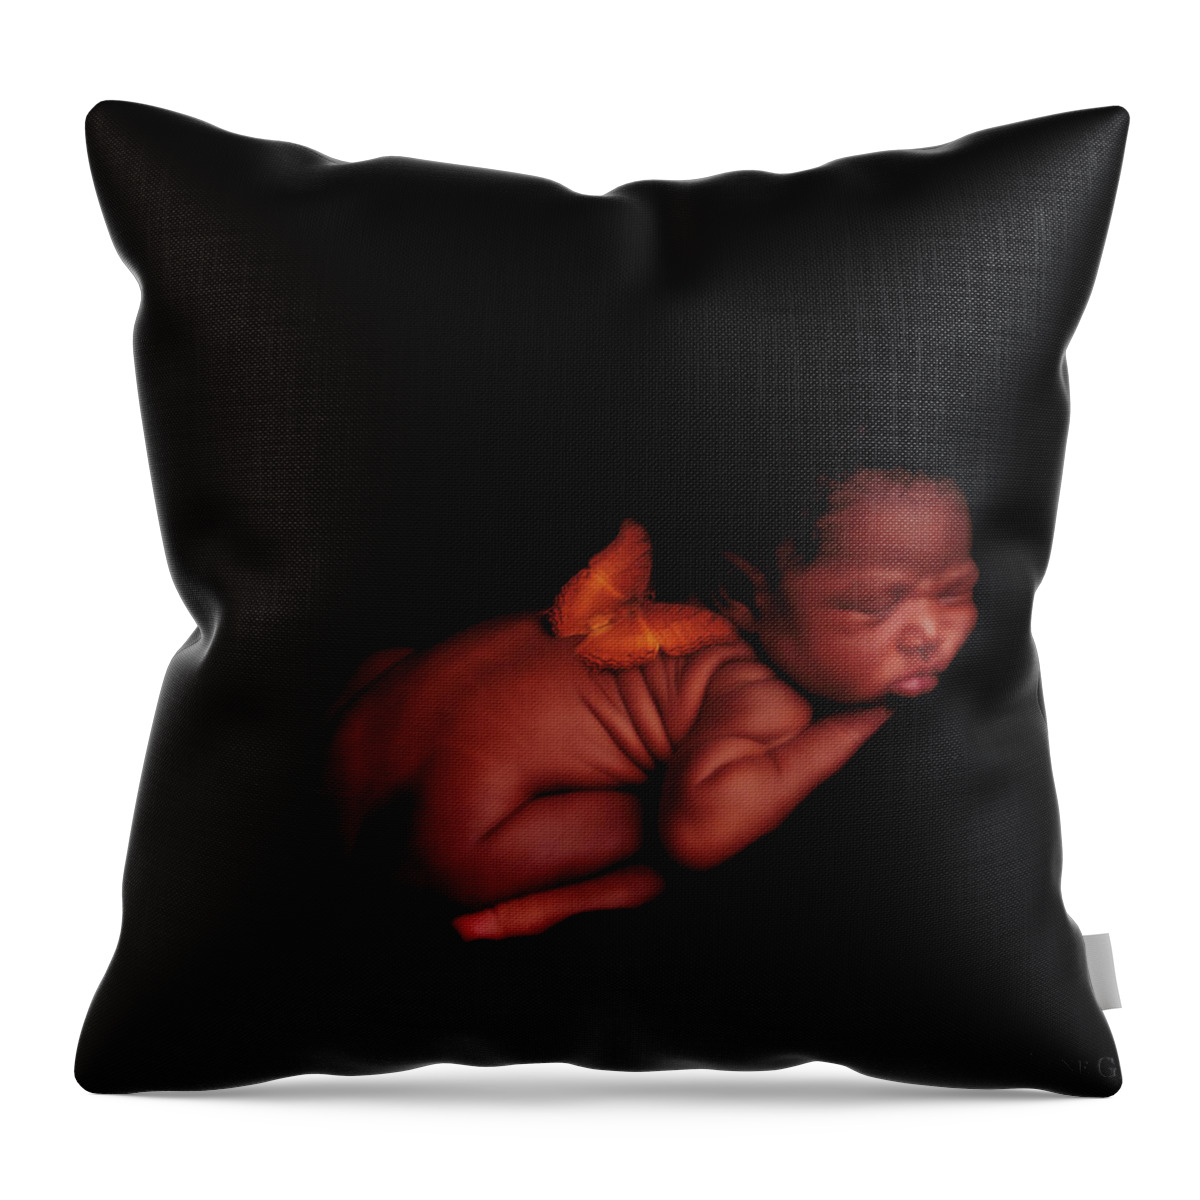 Baby Throw Pillow featuring the photograph Kwasi by Anne Geddes